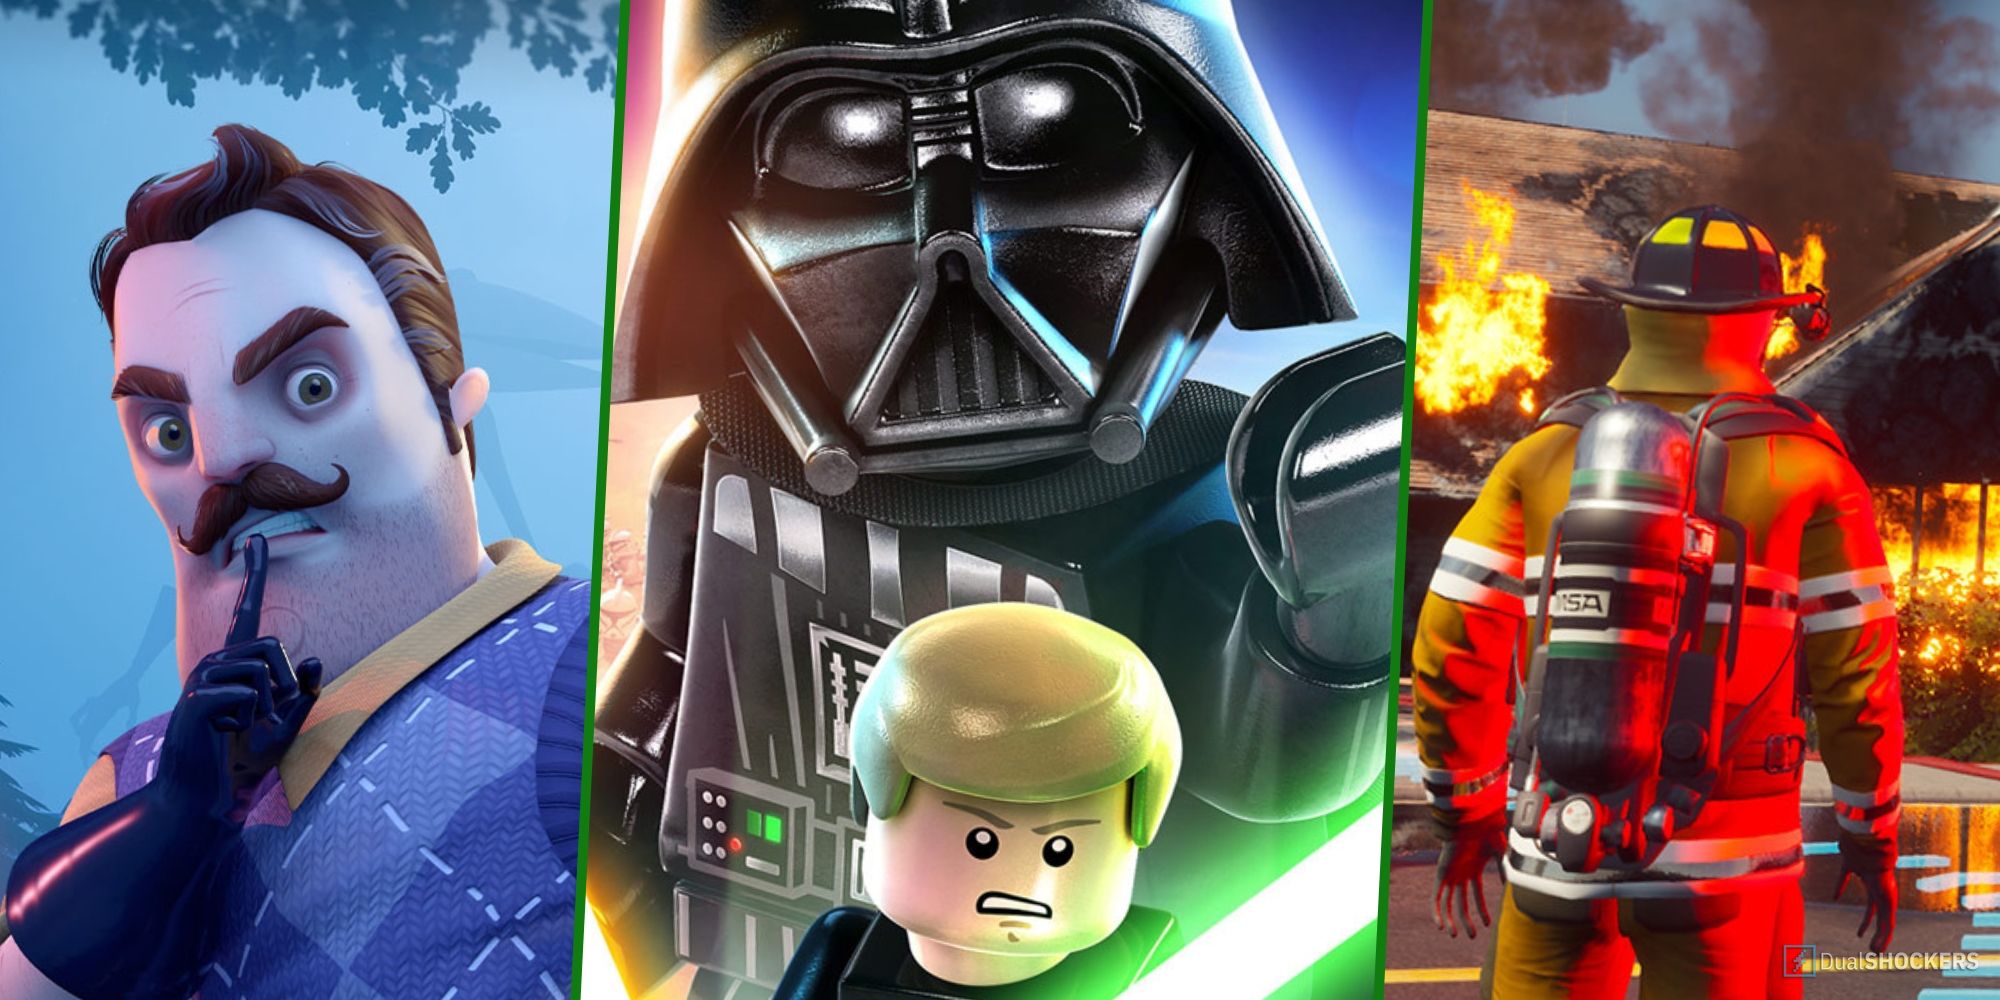 new game pass games include lego star wars and hello neighbor 2